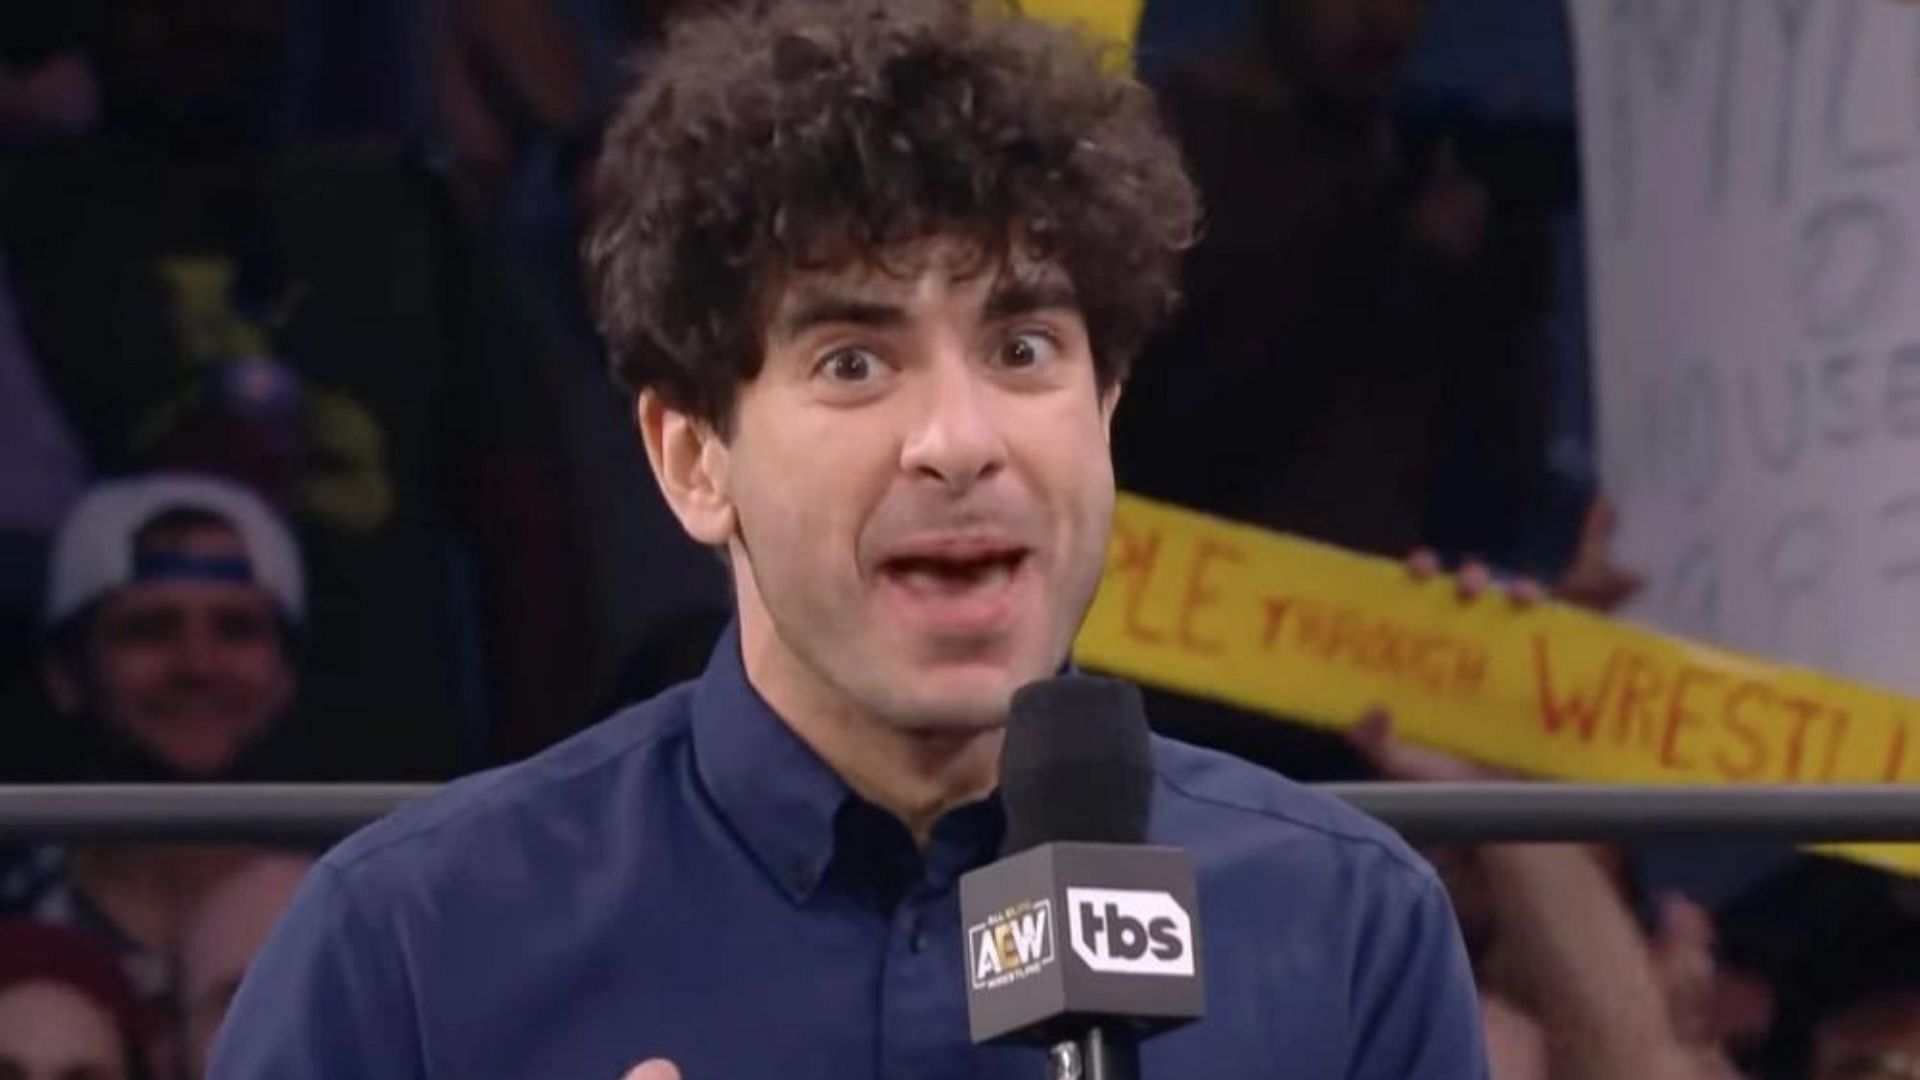 Will Tony Khan bring back a former UFC fighter to AEW?